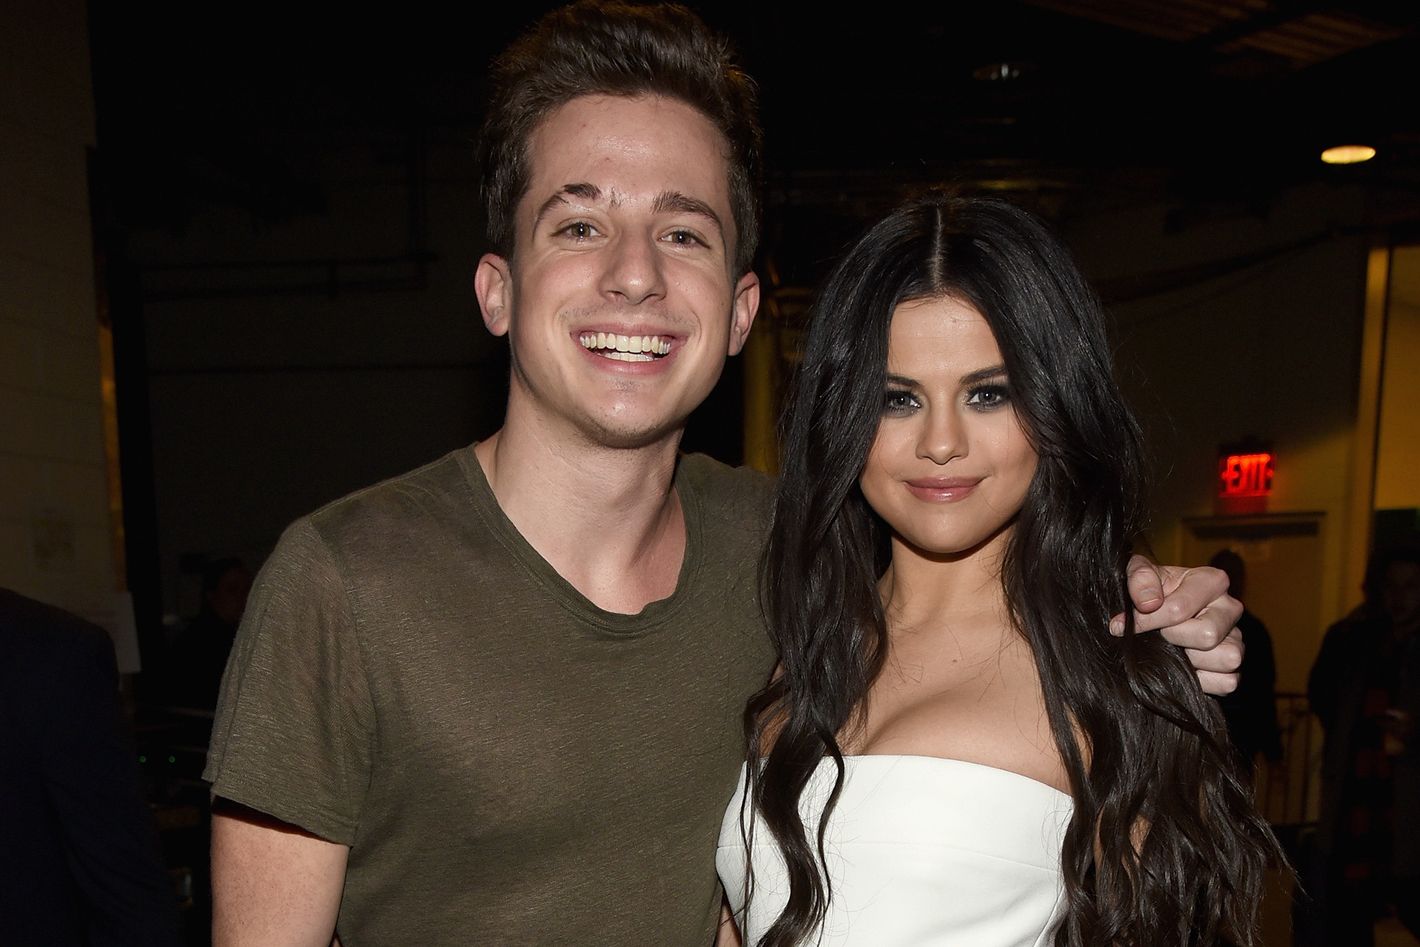 Charlie Puth and Selena Gomez Made the Chillest Breakup Duet